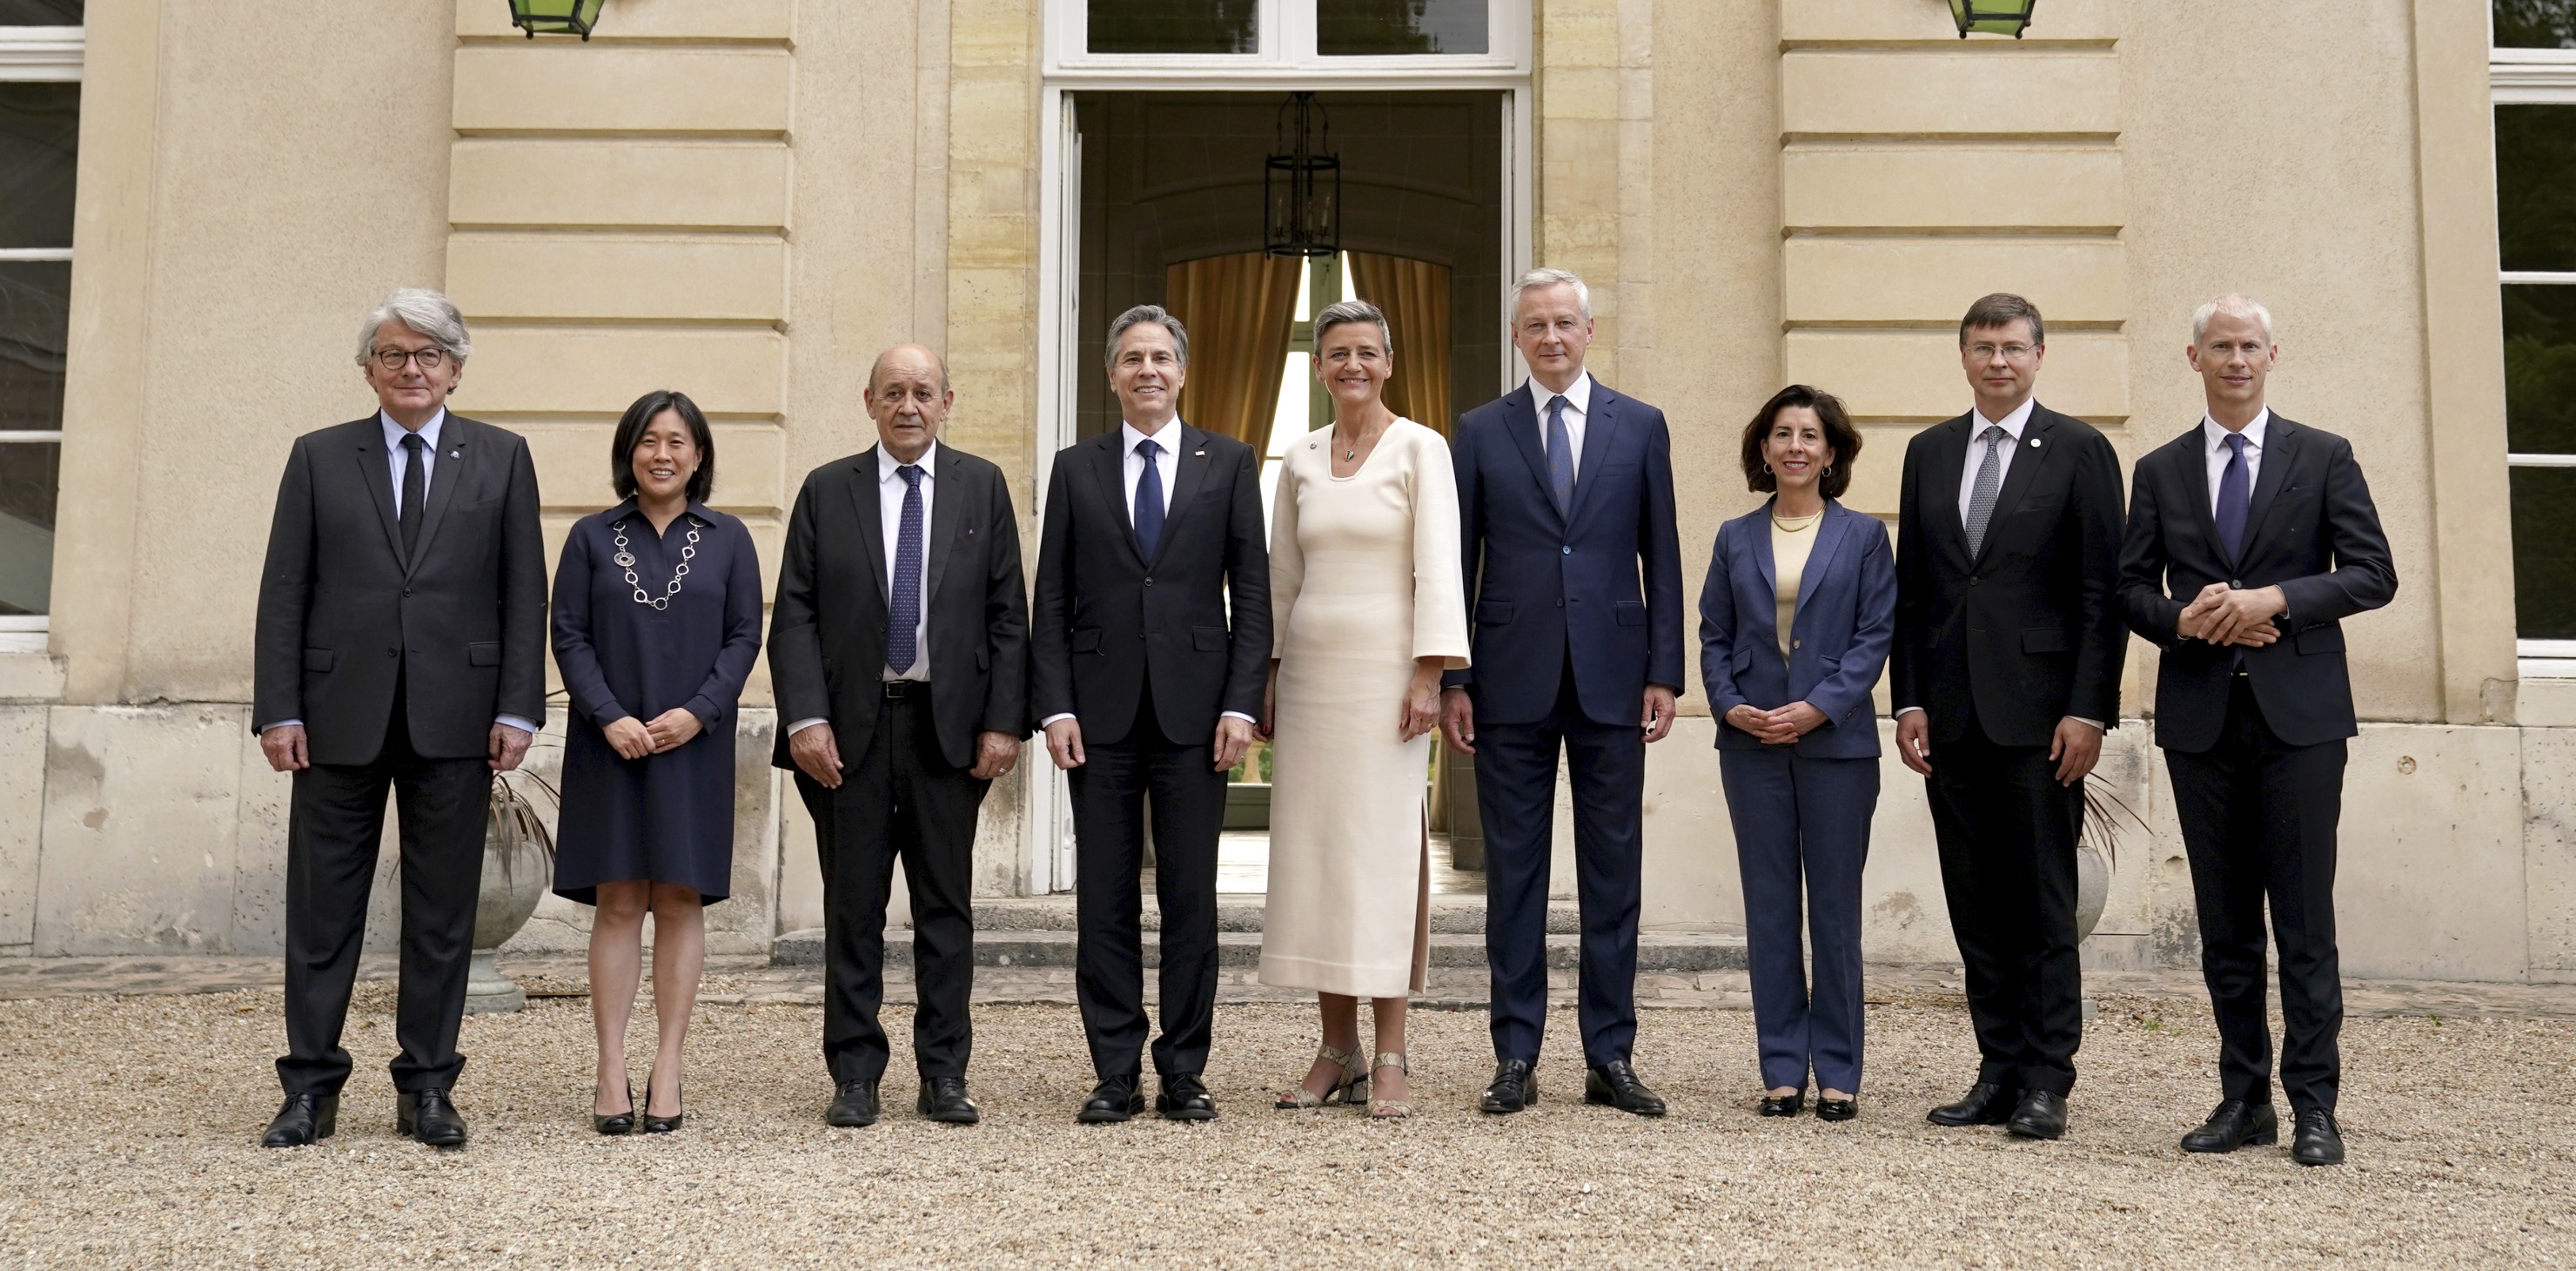 Antony Blinken, Margrethe Vestager and other guests pose for a group photo ahead of a dinner at the U.S.-European Union Trade and Technology Council summit, in Paris May 15, 2022